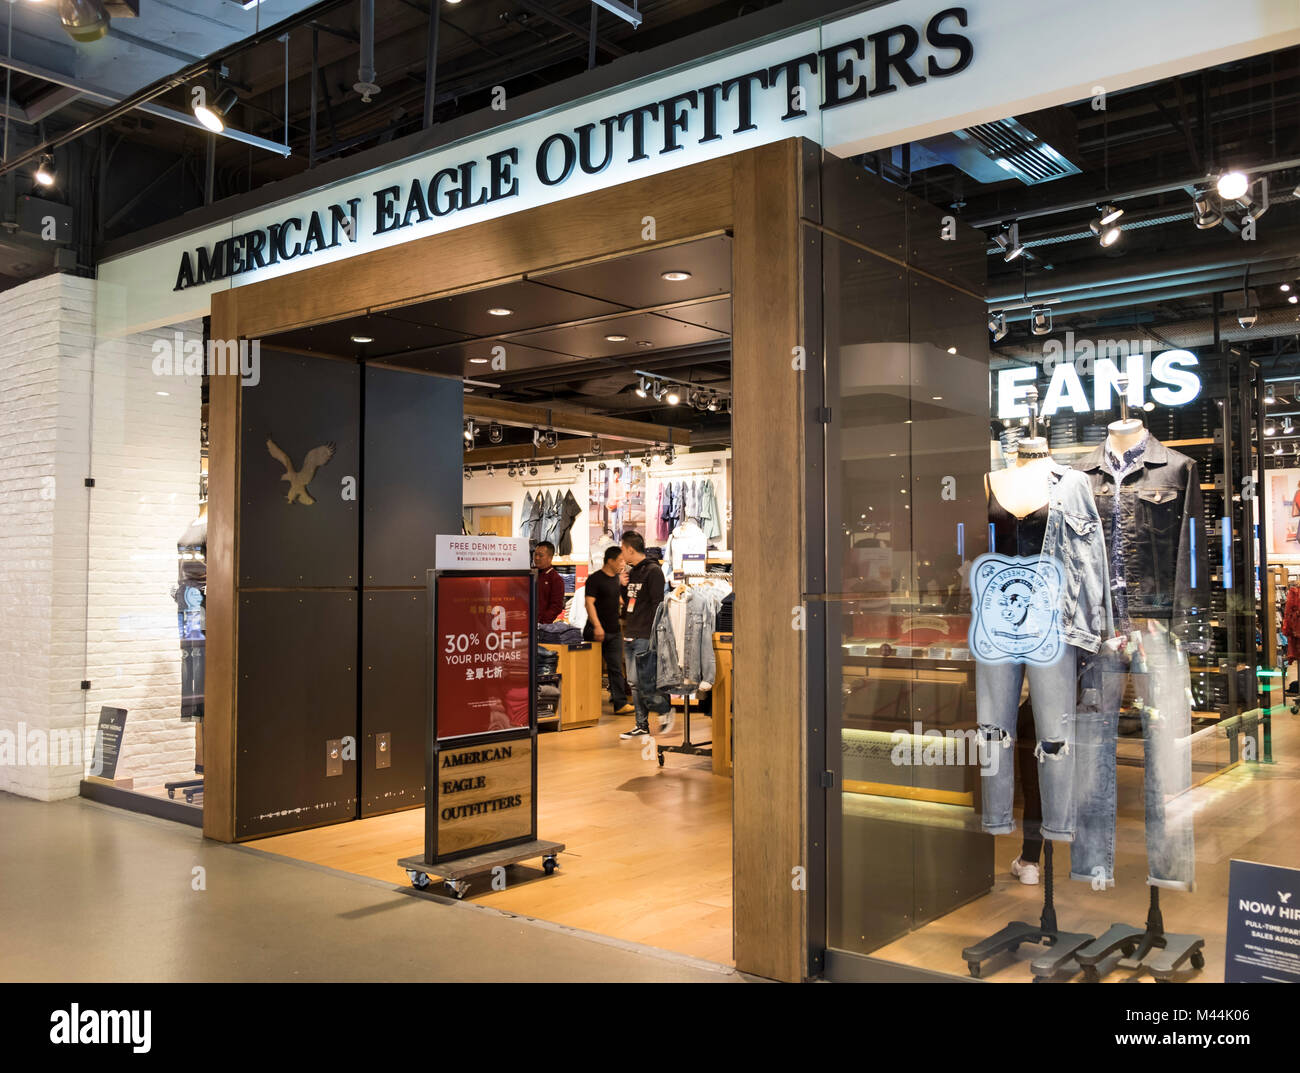 HONG KONG - FEBRUARY 4, 2018: American Eagle Outfitters in Hong Kong. American Eagle Outfitters, Inc. is an American clothing and accessories retailer Stock Photo